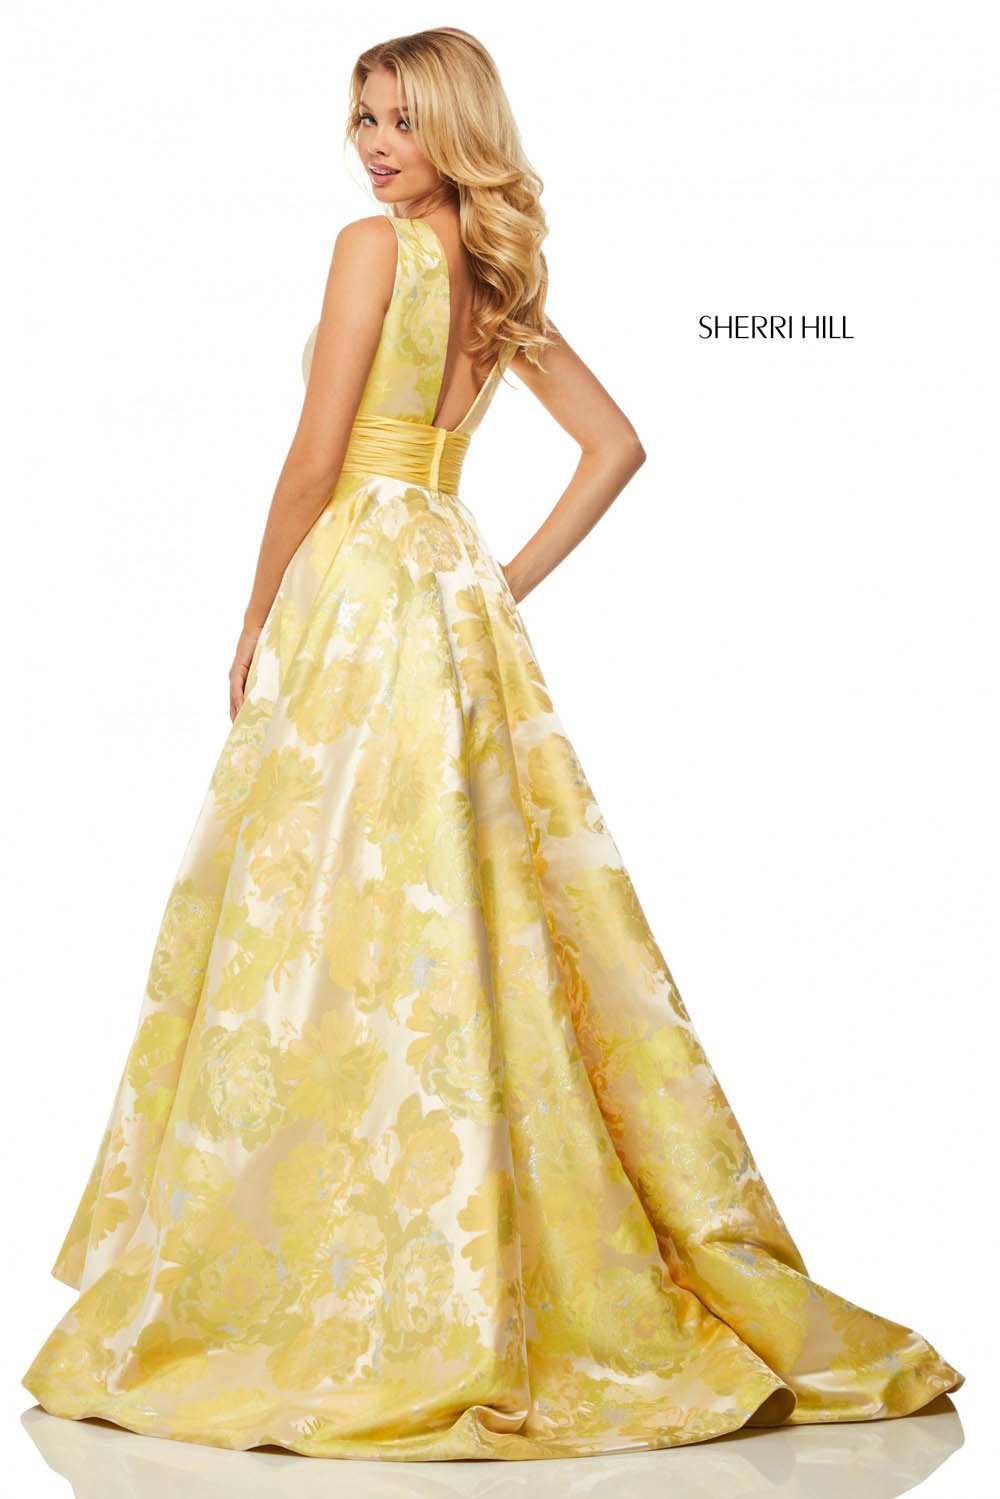 Sherri Hill 52899 dress images in these colors: Yellow Print.